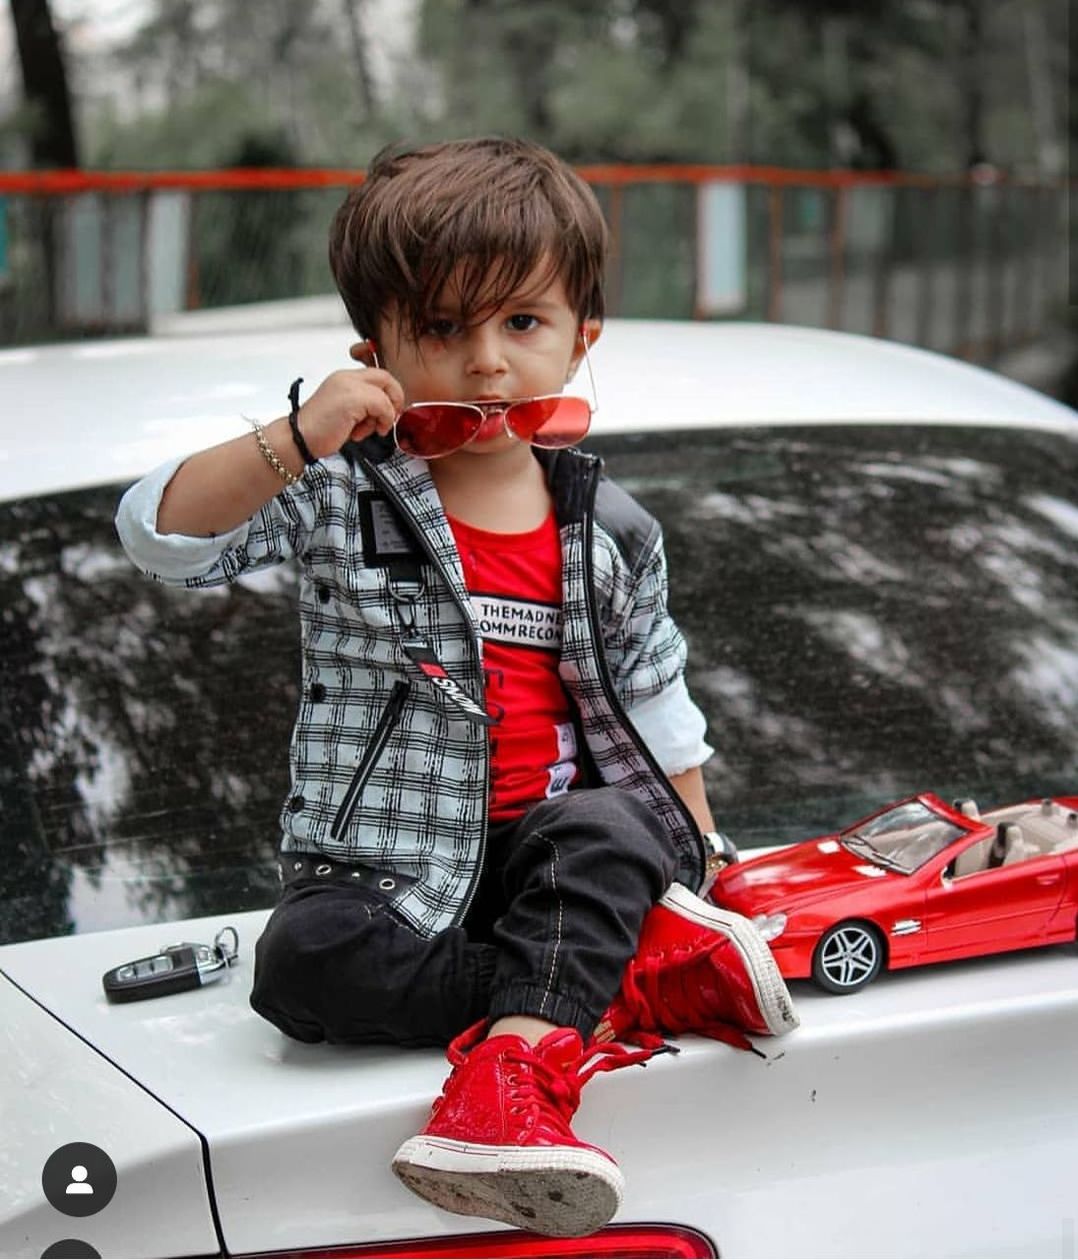 child, childhood, car, motor vehicle, one person, boys, males, real people, mode of transportation, men, full length, winter, innocence, lifestyles, cute, day, casual clothing, toy car, outdoors, warm clothing